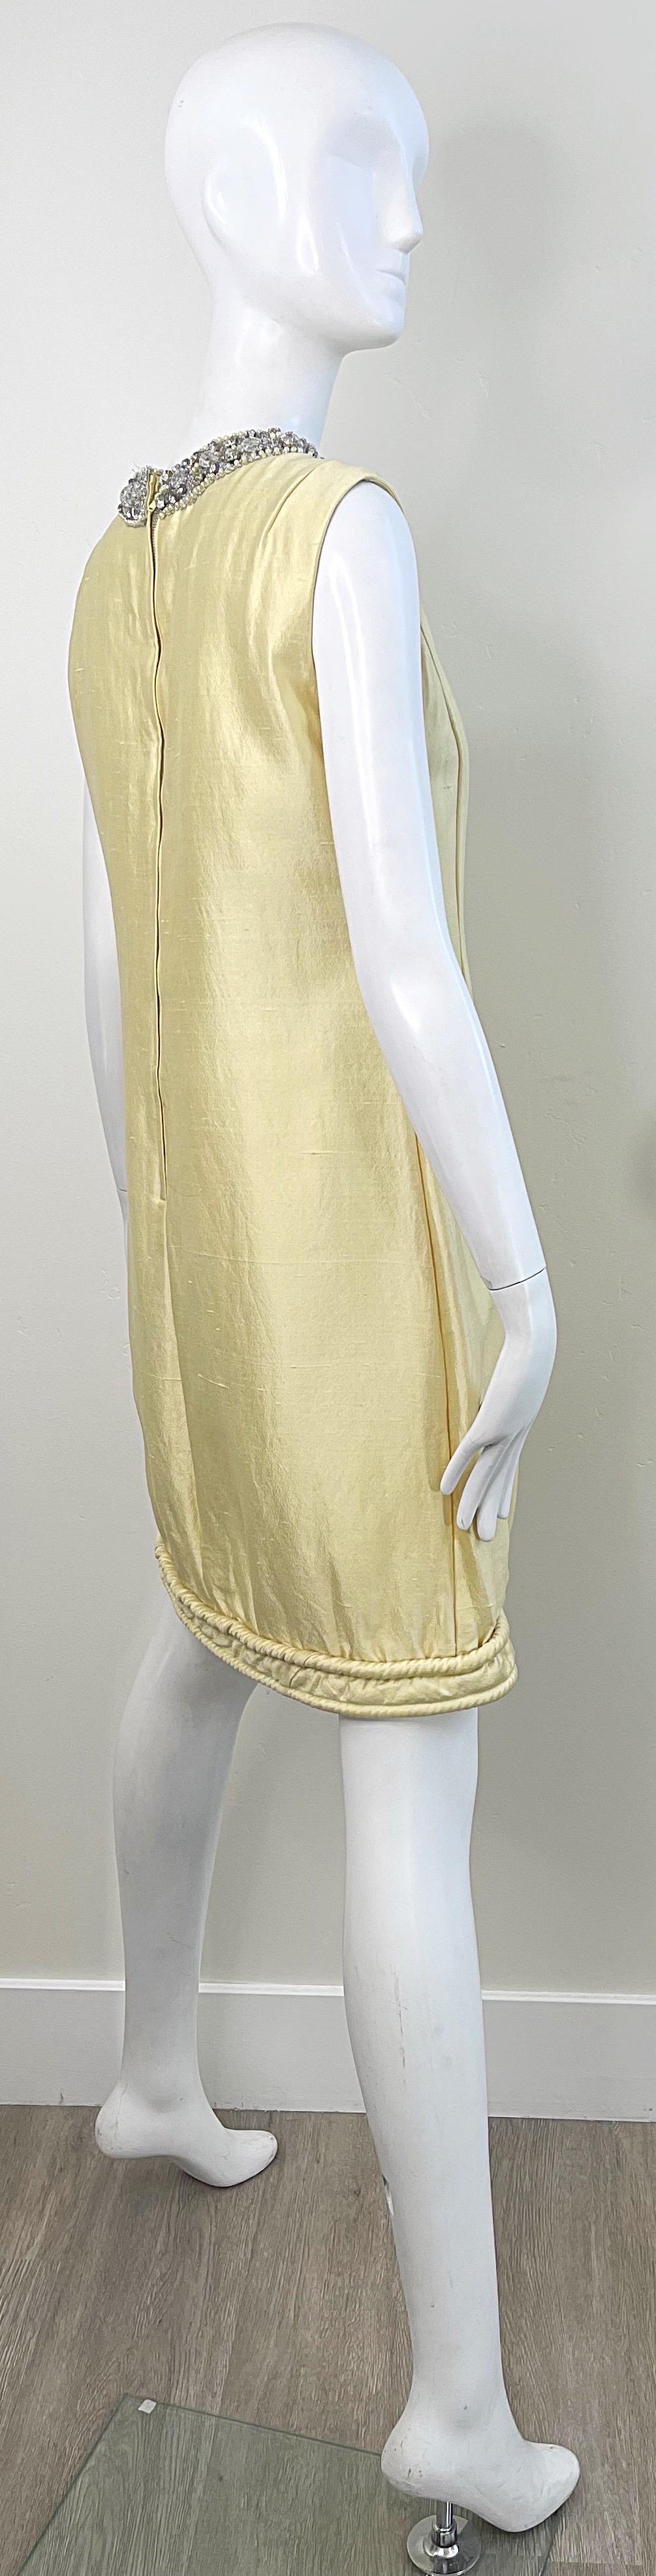 Chic 1960s Pale Yellow Silk Shantung Rhinestone Beaded Vintage 60s Shift Dress For Sale 2